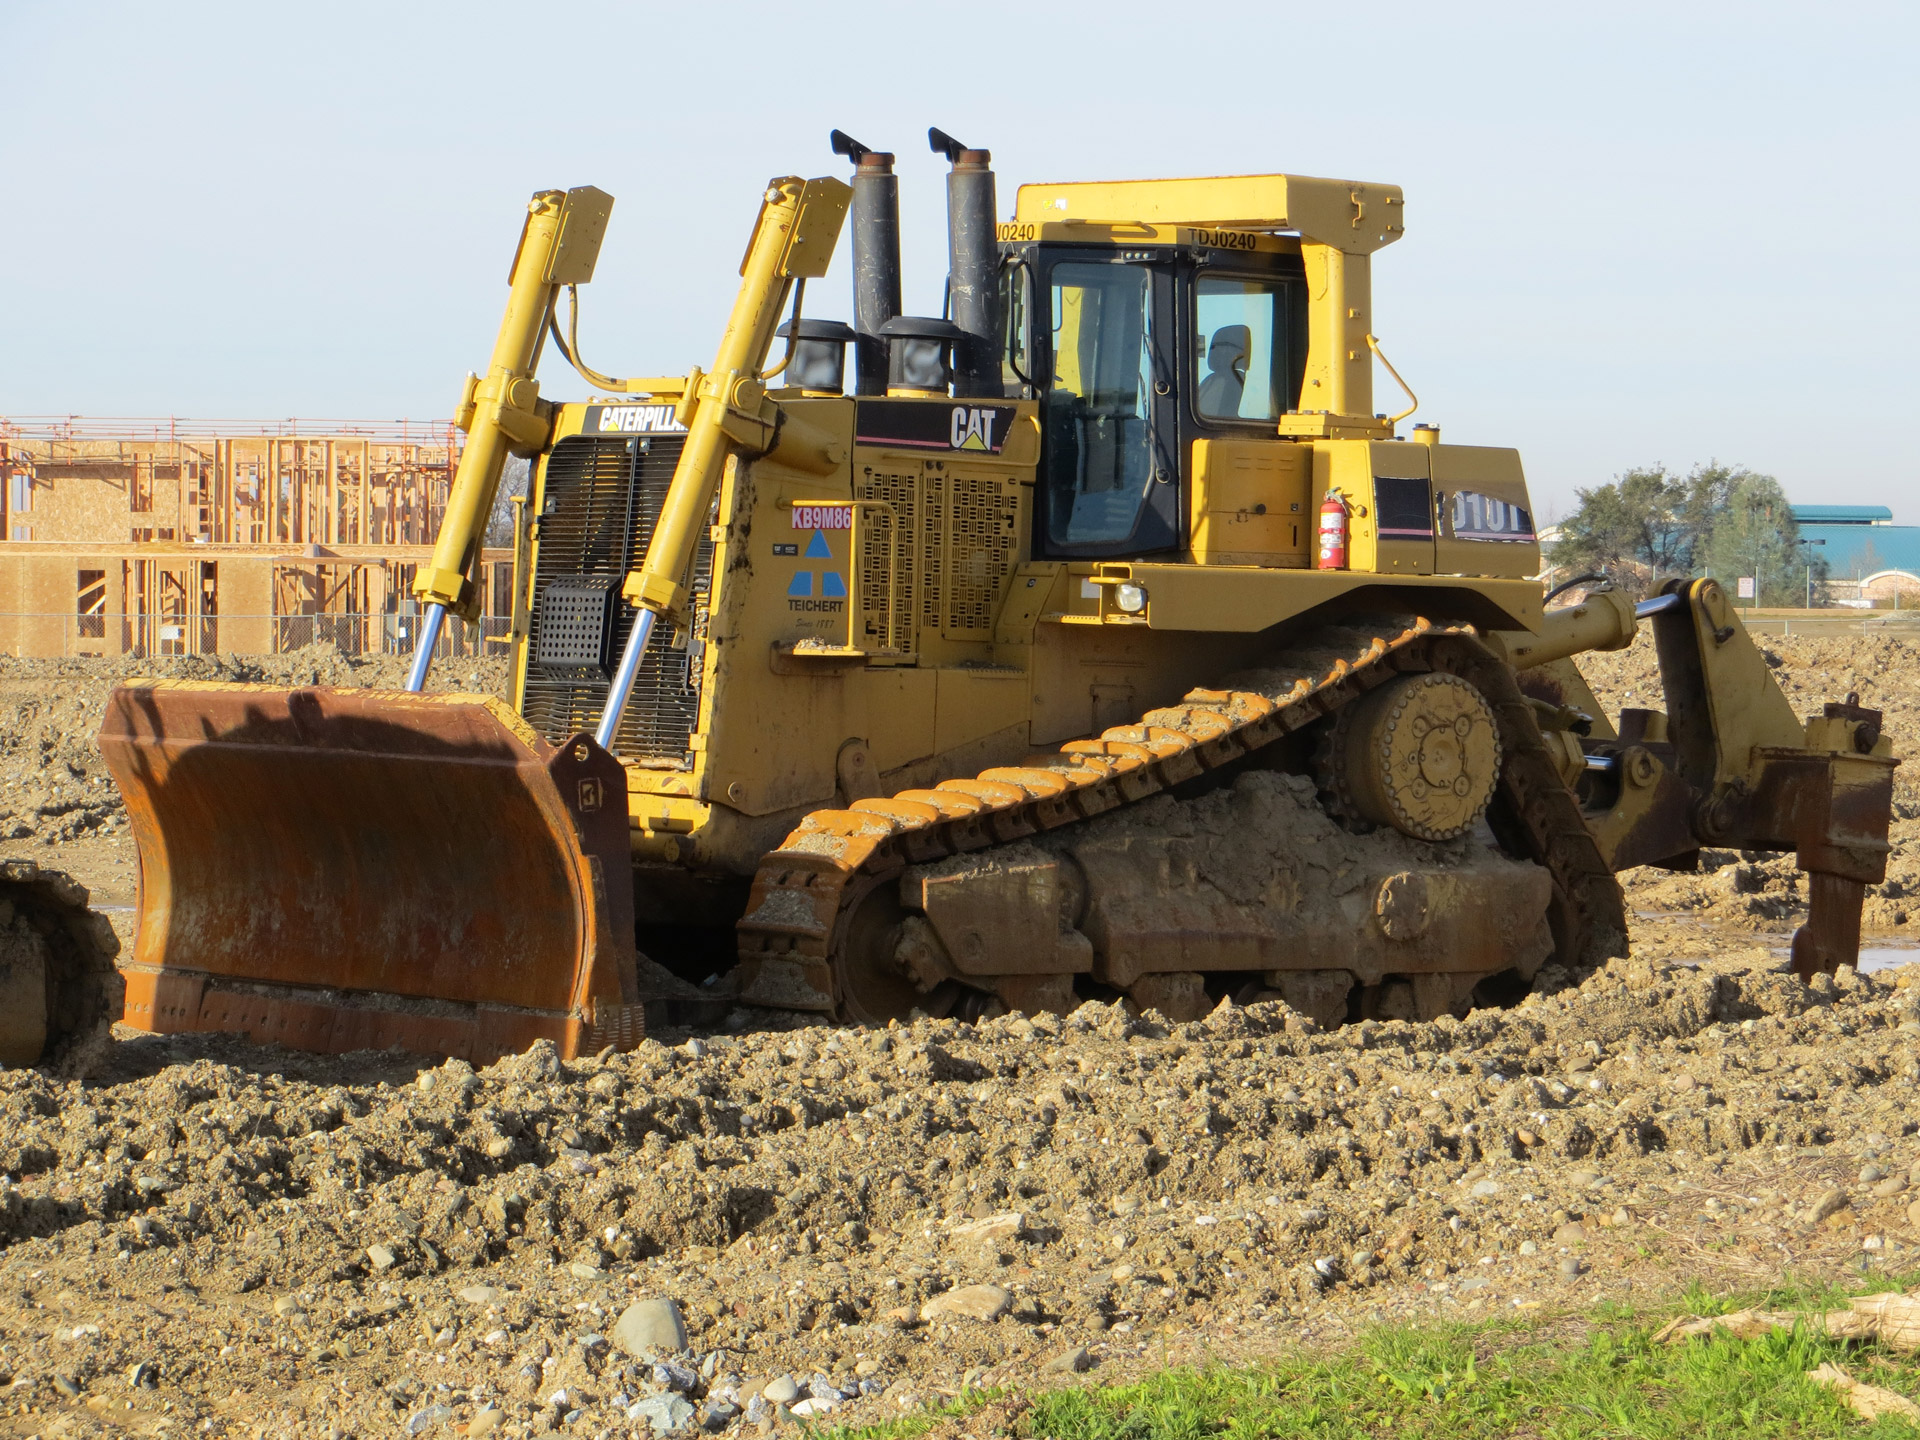 Earth Mover 564